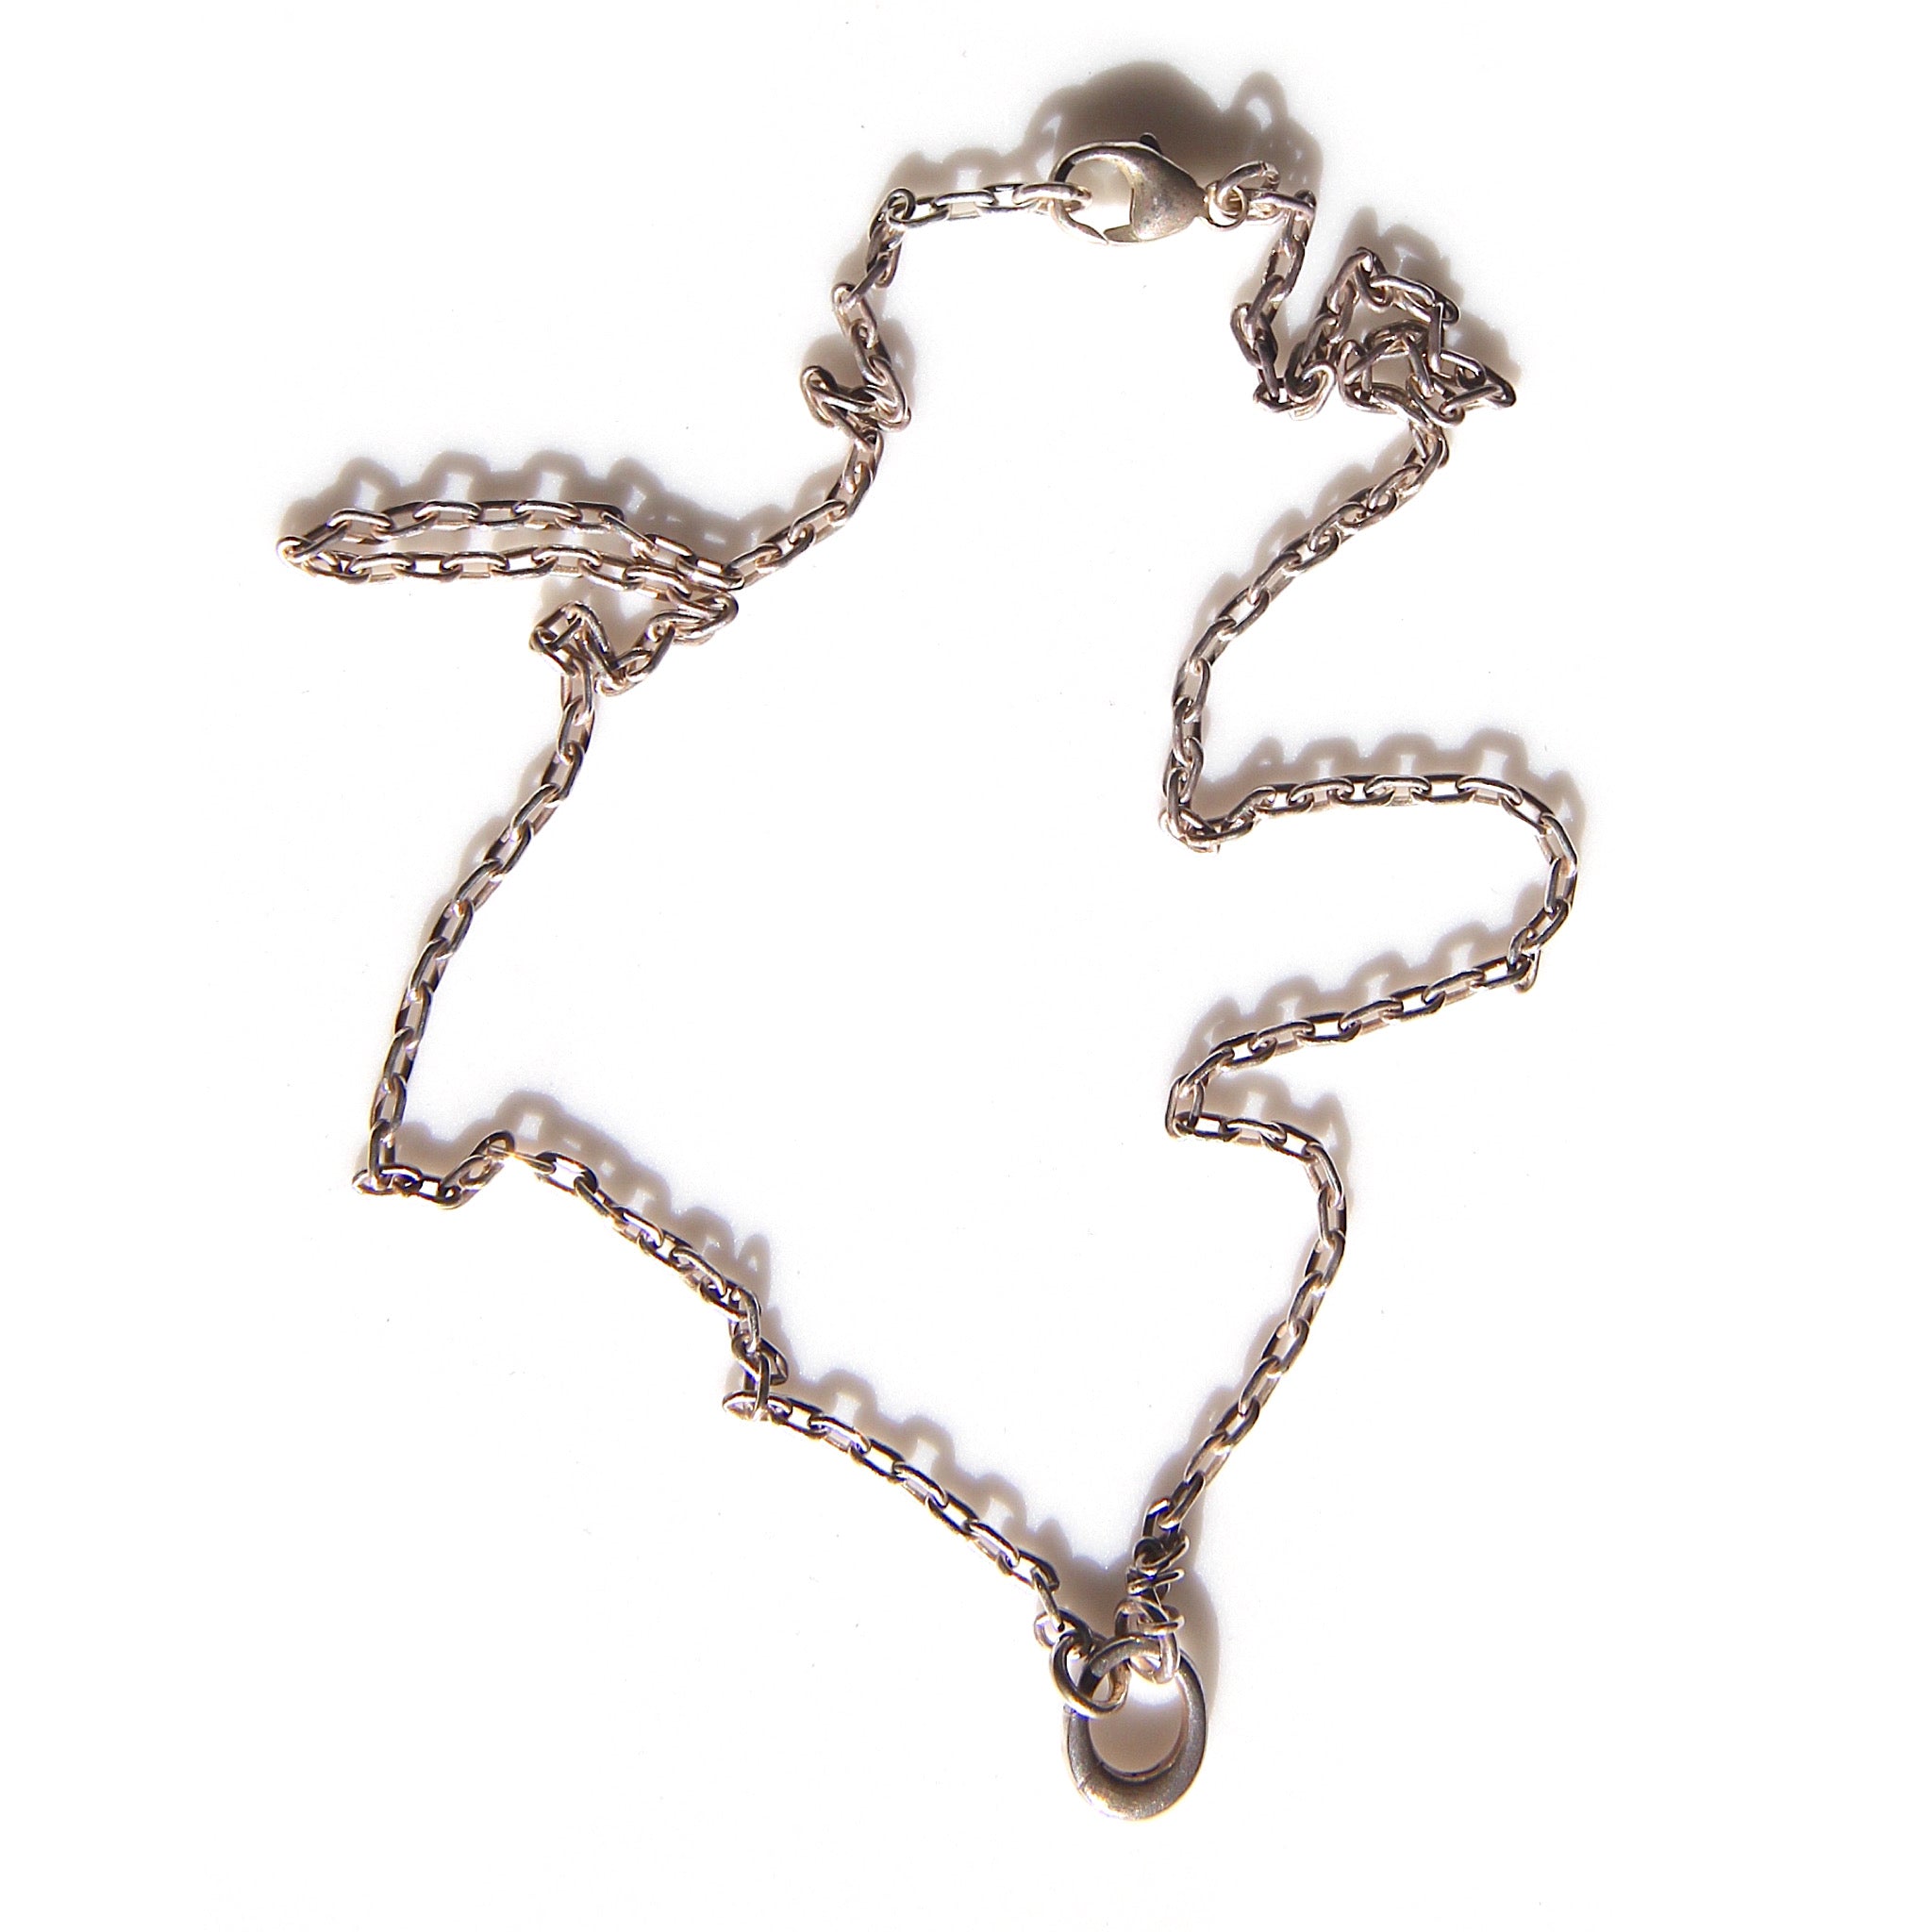 Squared-oval link chain that holds charms